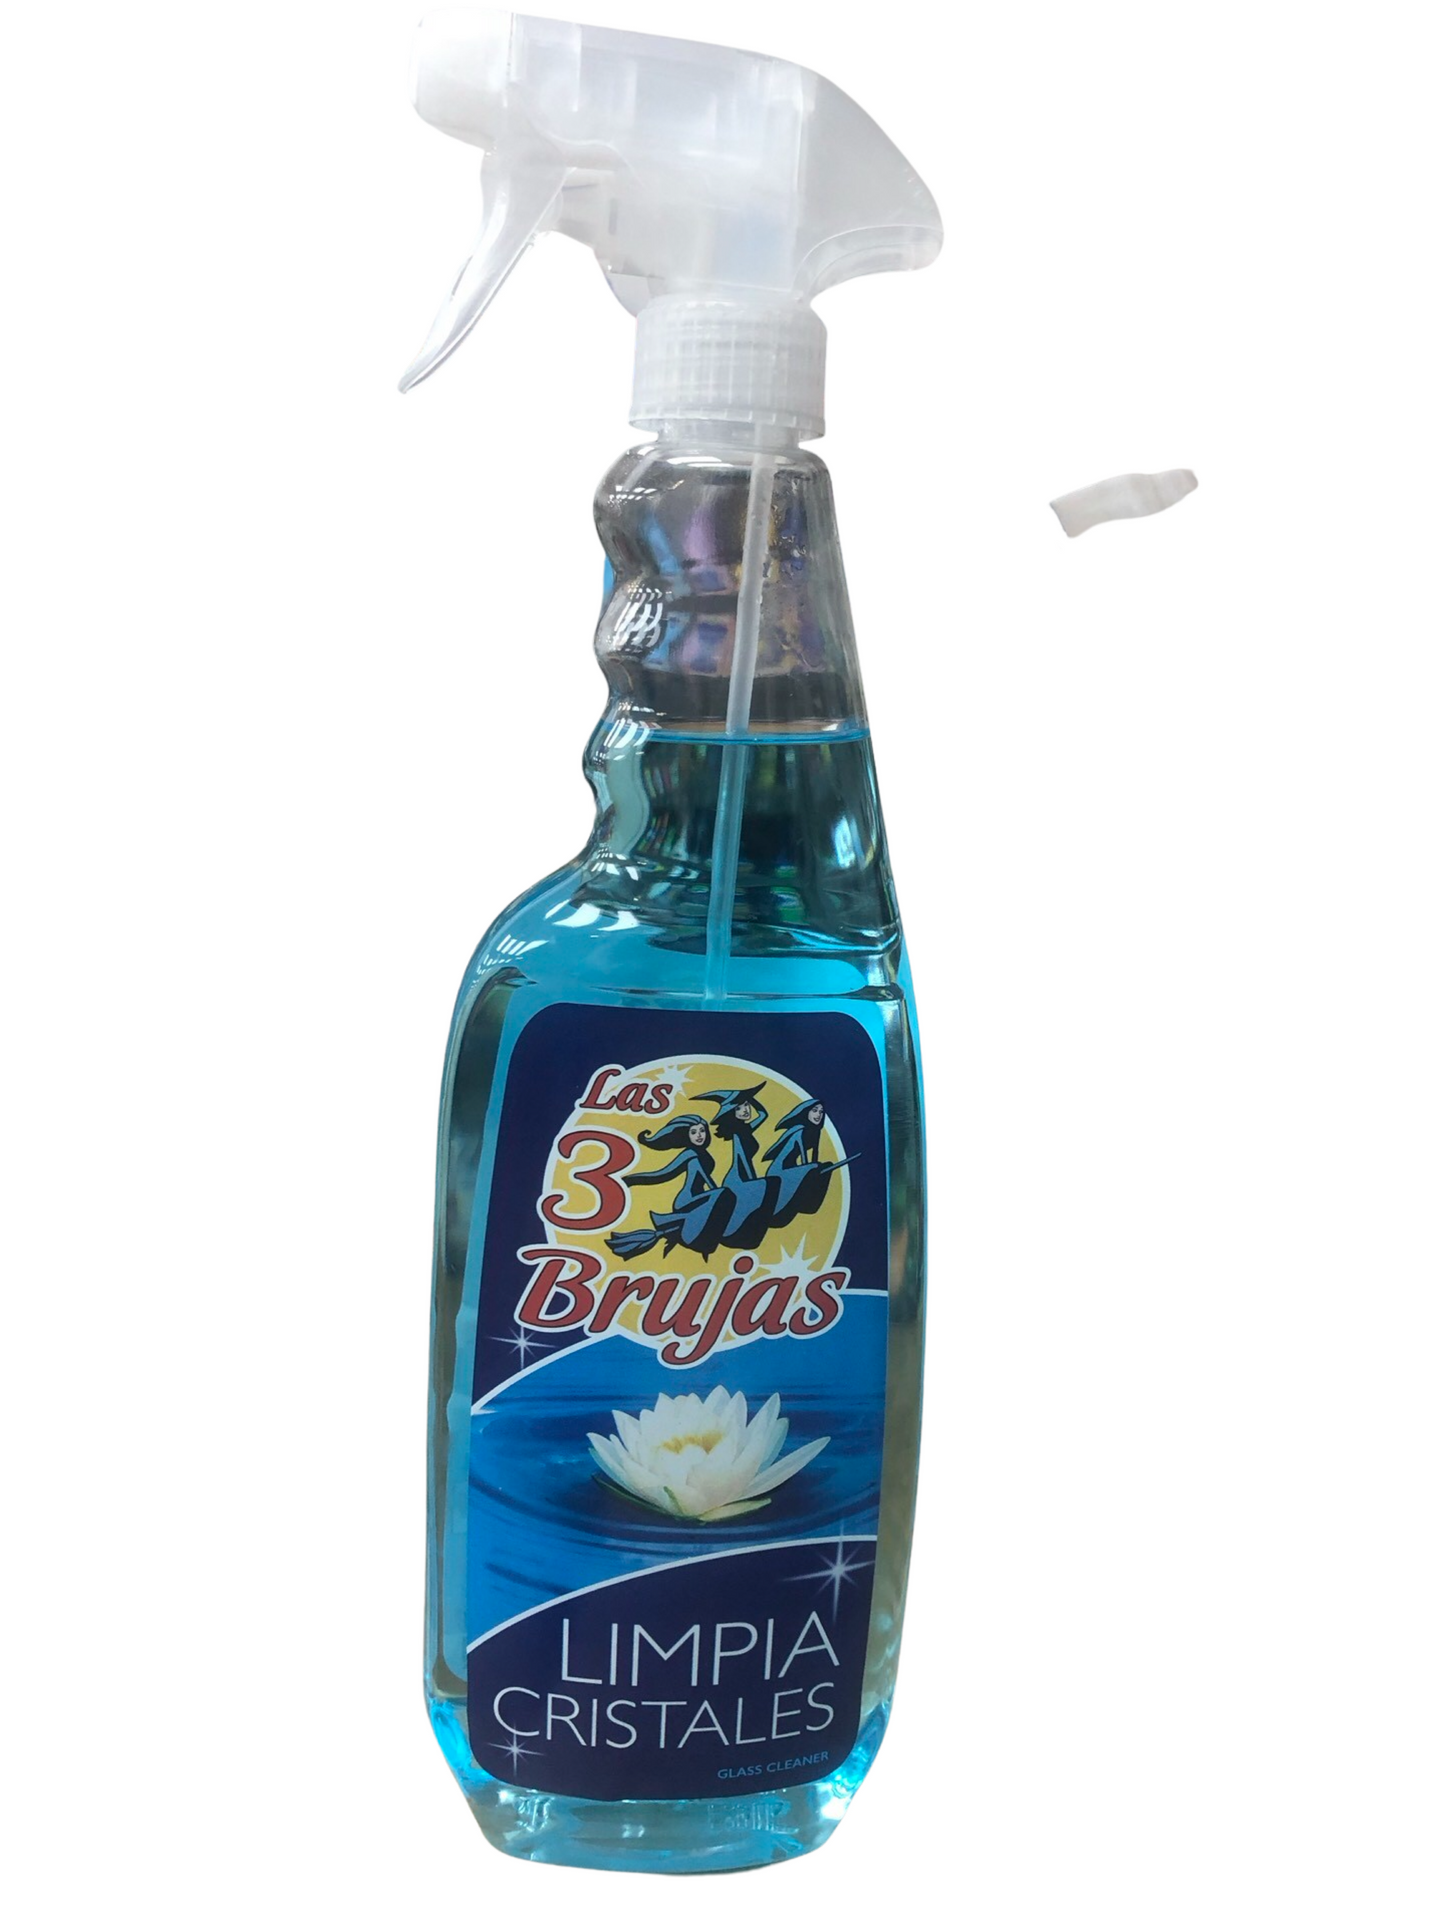 3 Brujas / 3 Witches Glass and Mirror Cleaner 750ml